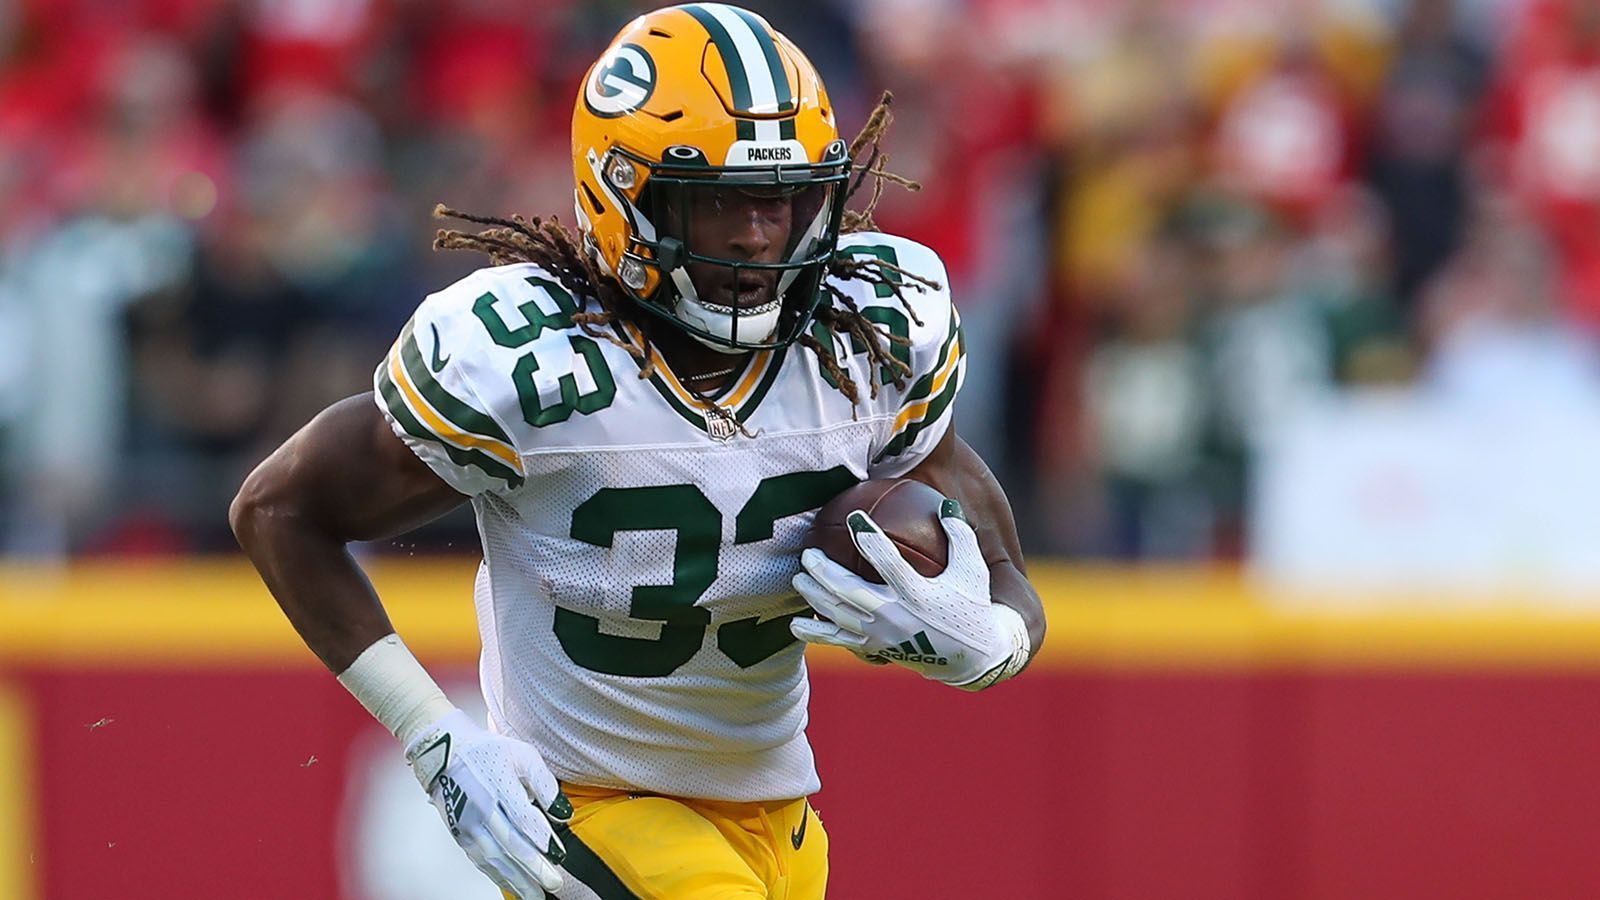 
                <strong>8. Platz: Aaron Jones</strong><br>
                &#x2022; Team: Green Bay Packers<br>&#x2022; Position: Running Back<br>&#x2022; <strong>Overall Rating: 89</strong><br>&#x2022; Key Stats: Speed 90 - Acceleration 93 - Agility 93<br>
              